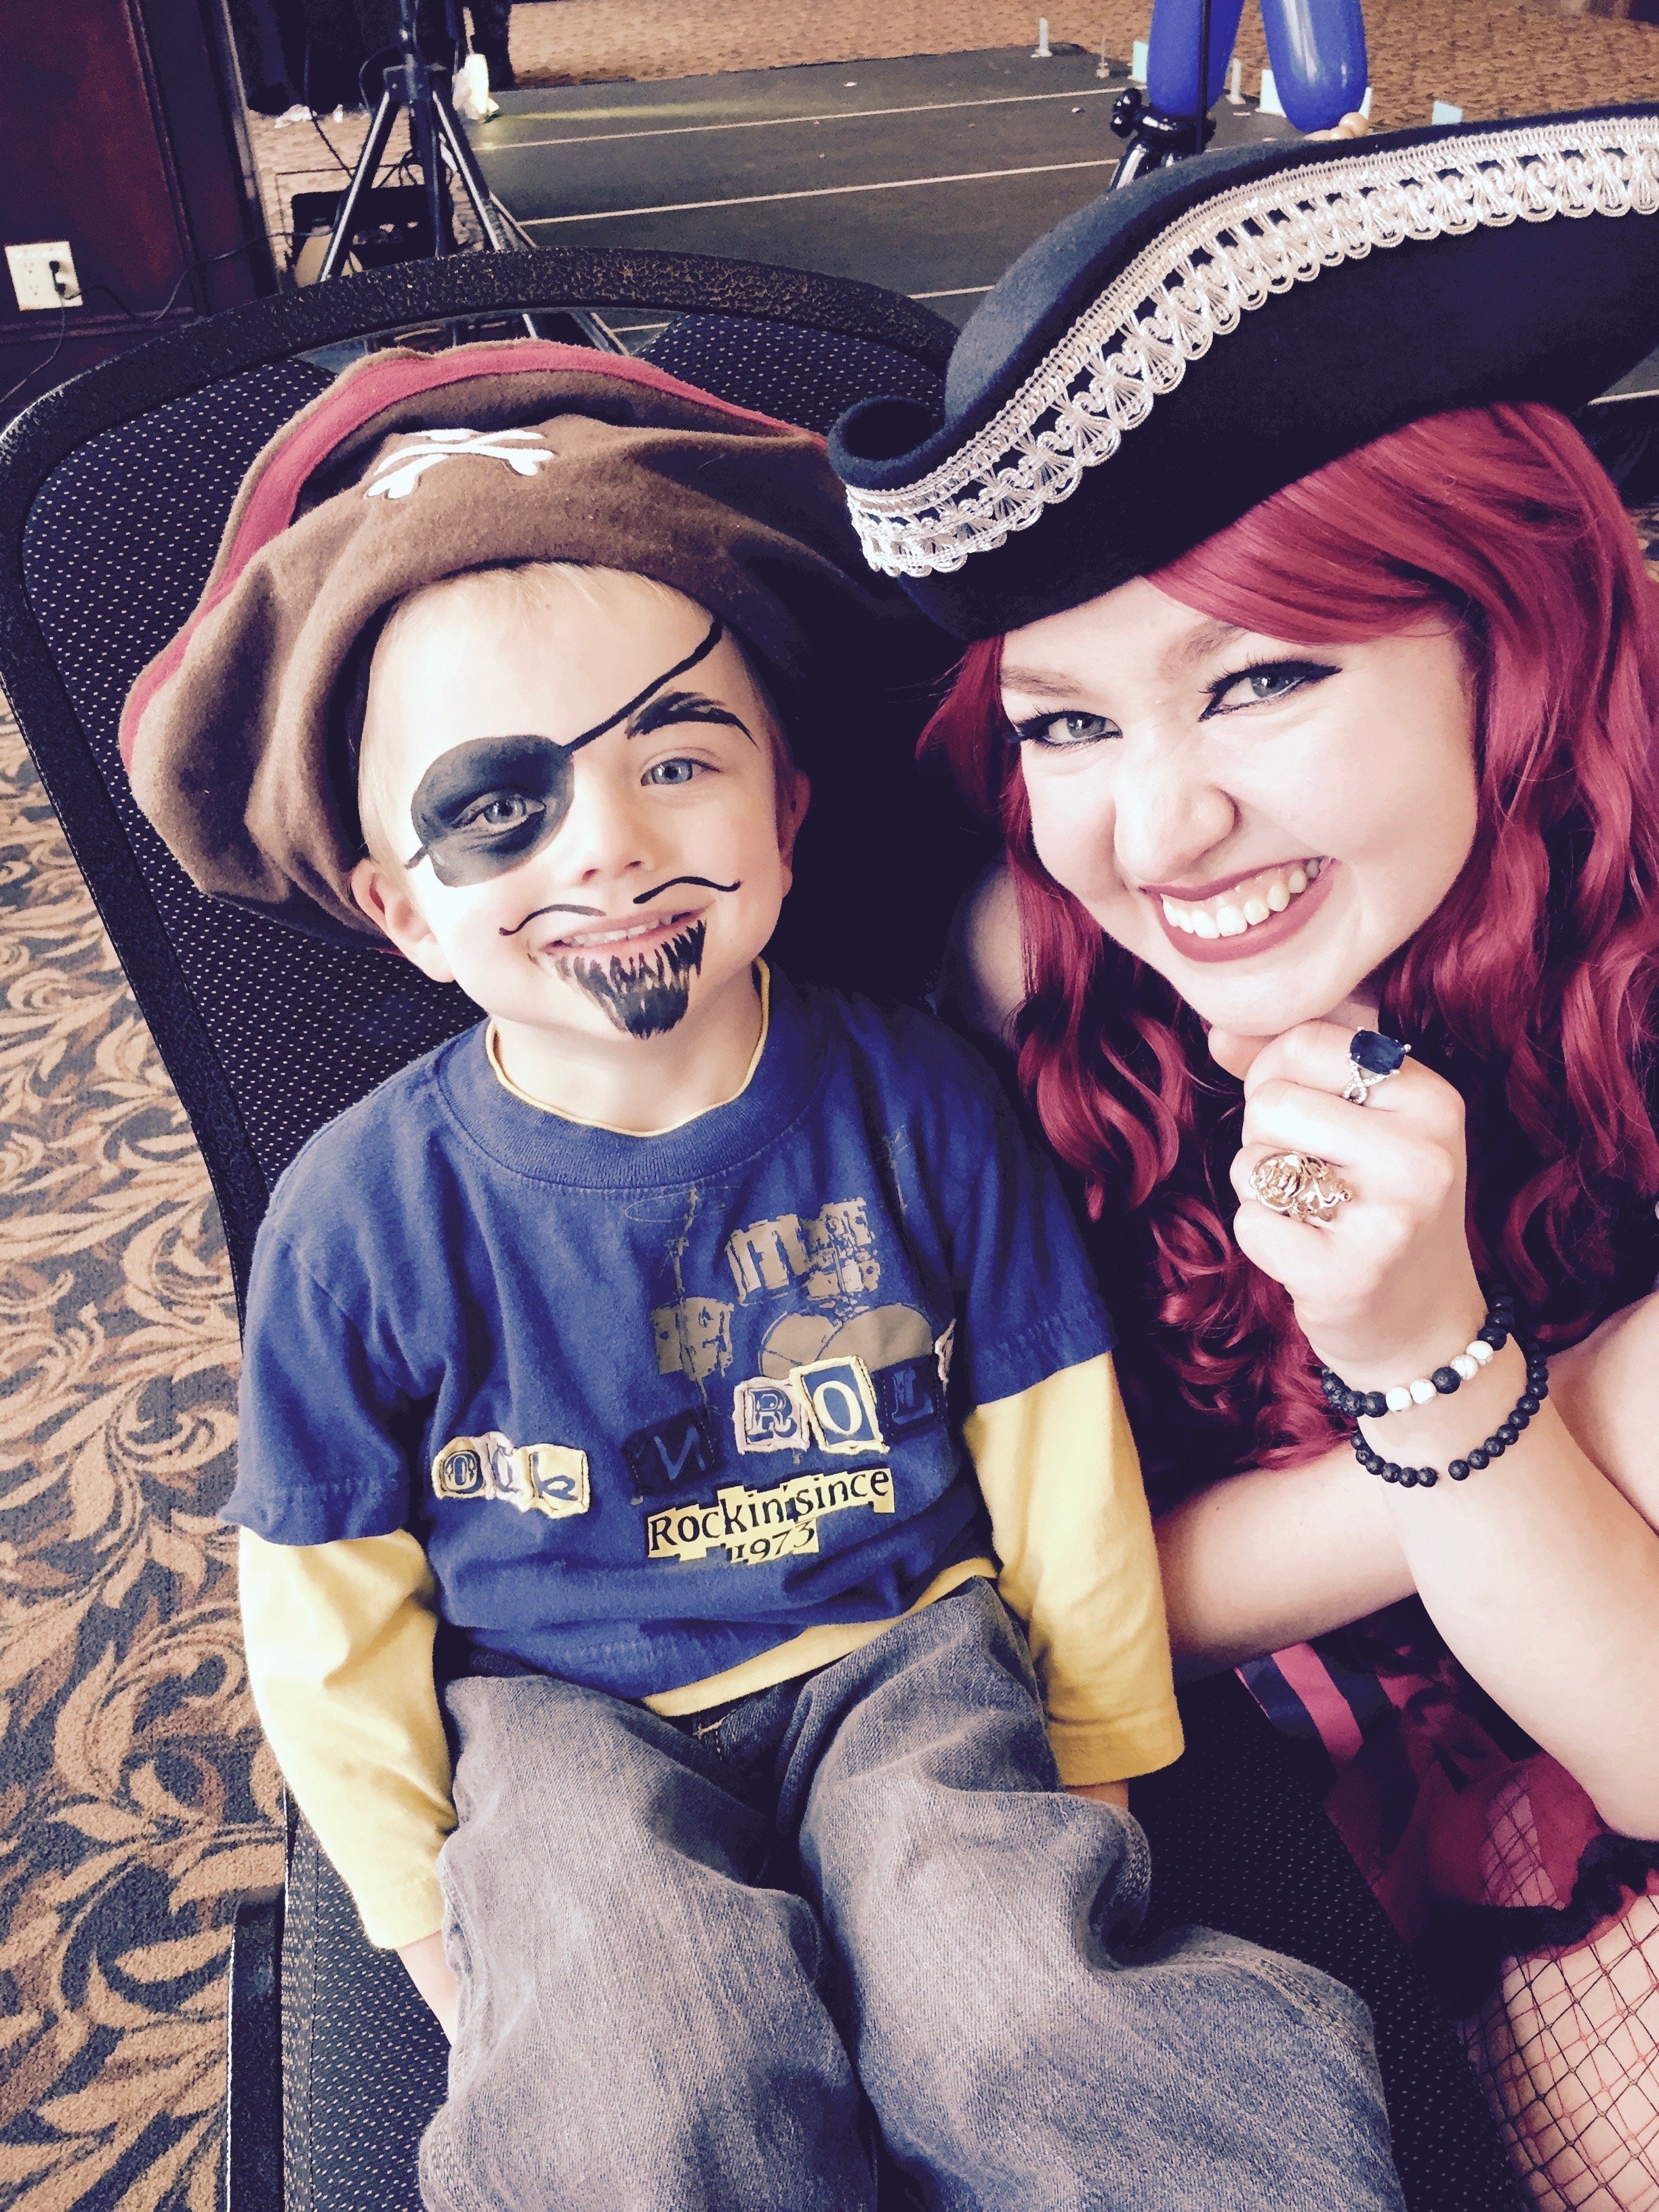 Pirate Sally and her mate Emerson